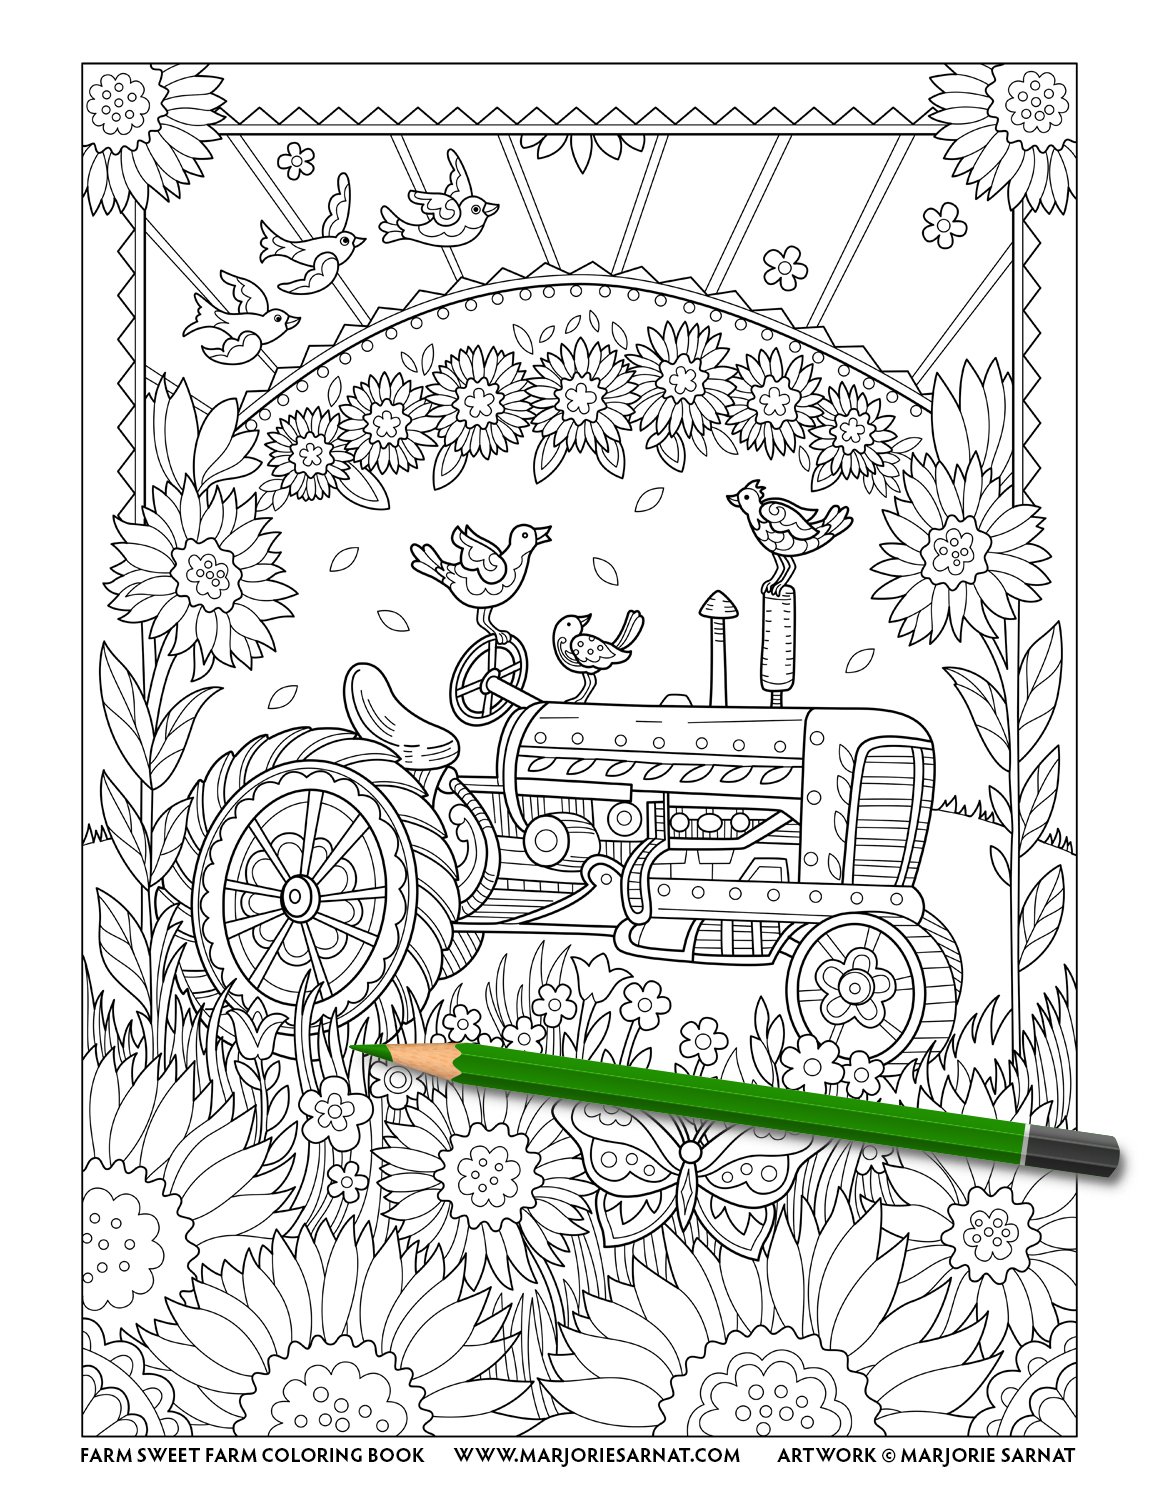 Tractor In Sunflowers